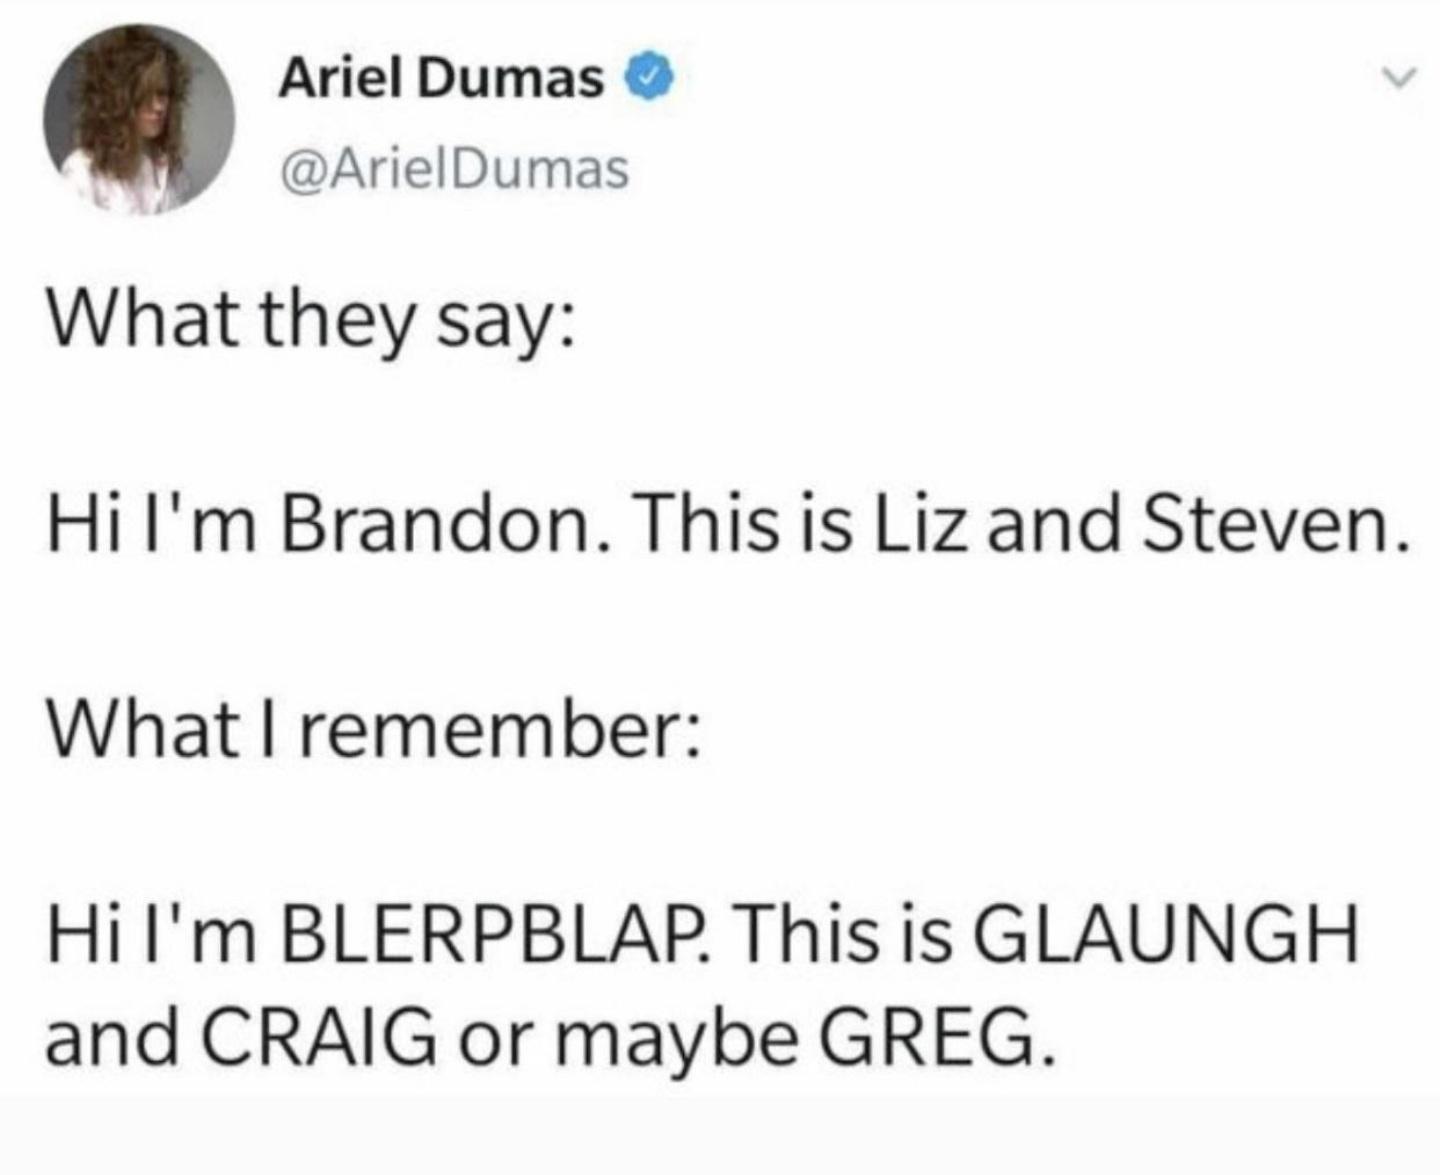 funny tweets - hot tweets - twitter memes - paper - Ariel Dumas What they say Hi I'm Brandon. This is Liz and Steven. What I remember Hi I'm Blerpblap. This is Glaungh and Craig or maybe Greg.